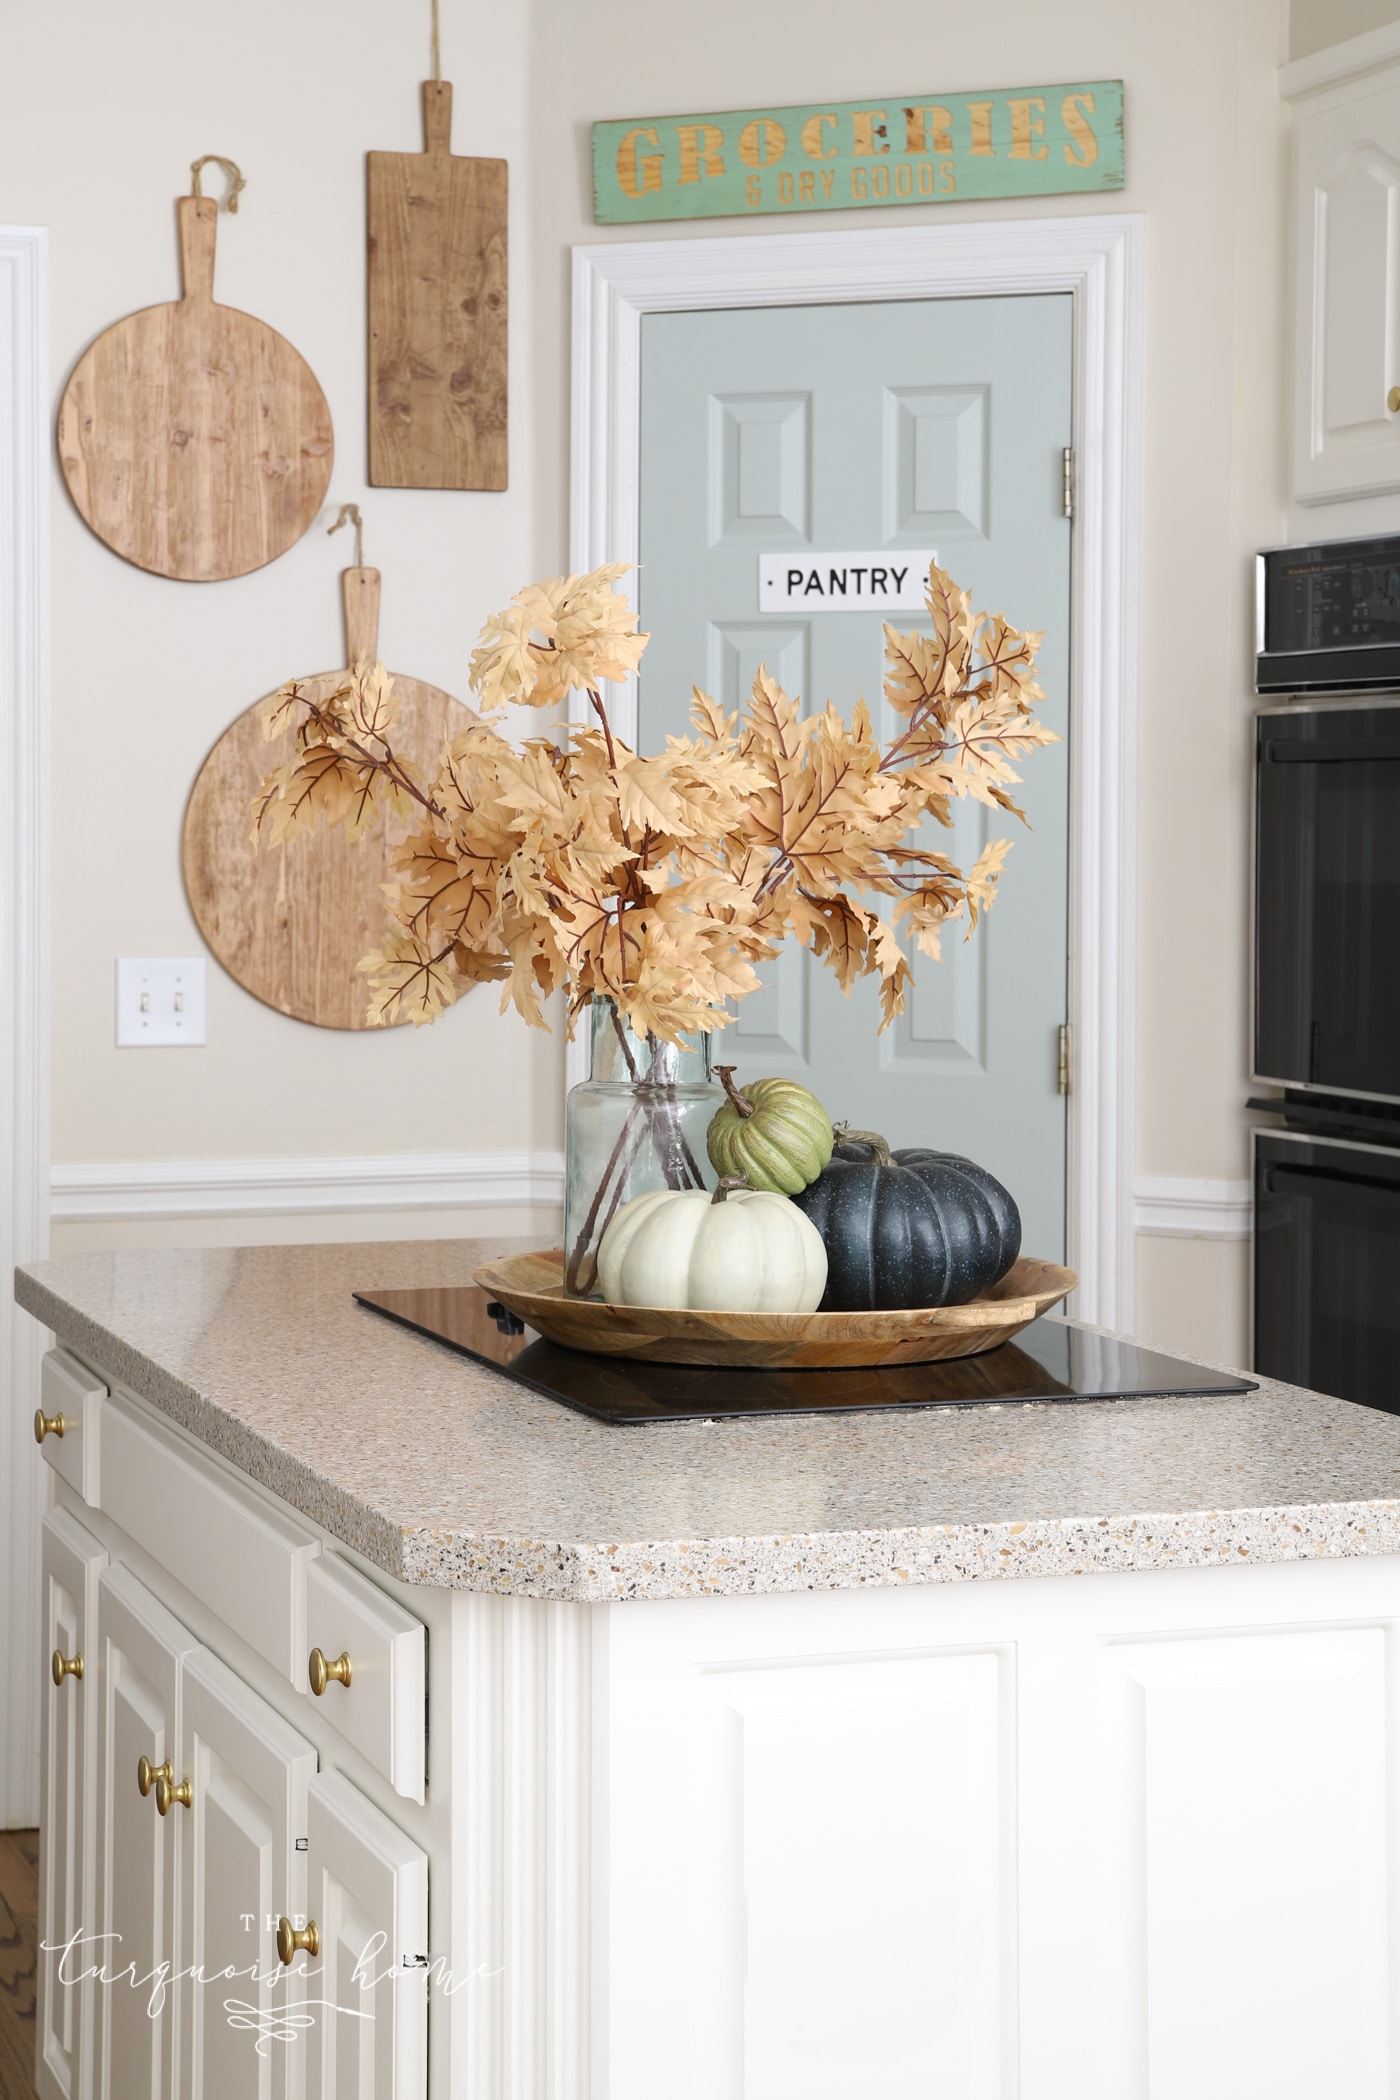 Simple Fall Decor in the Kitchen